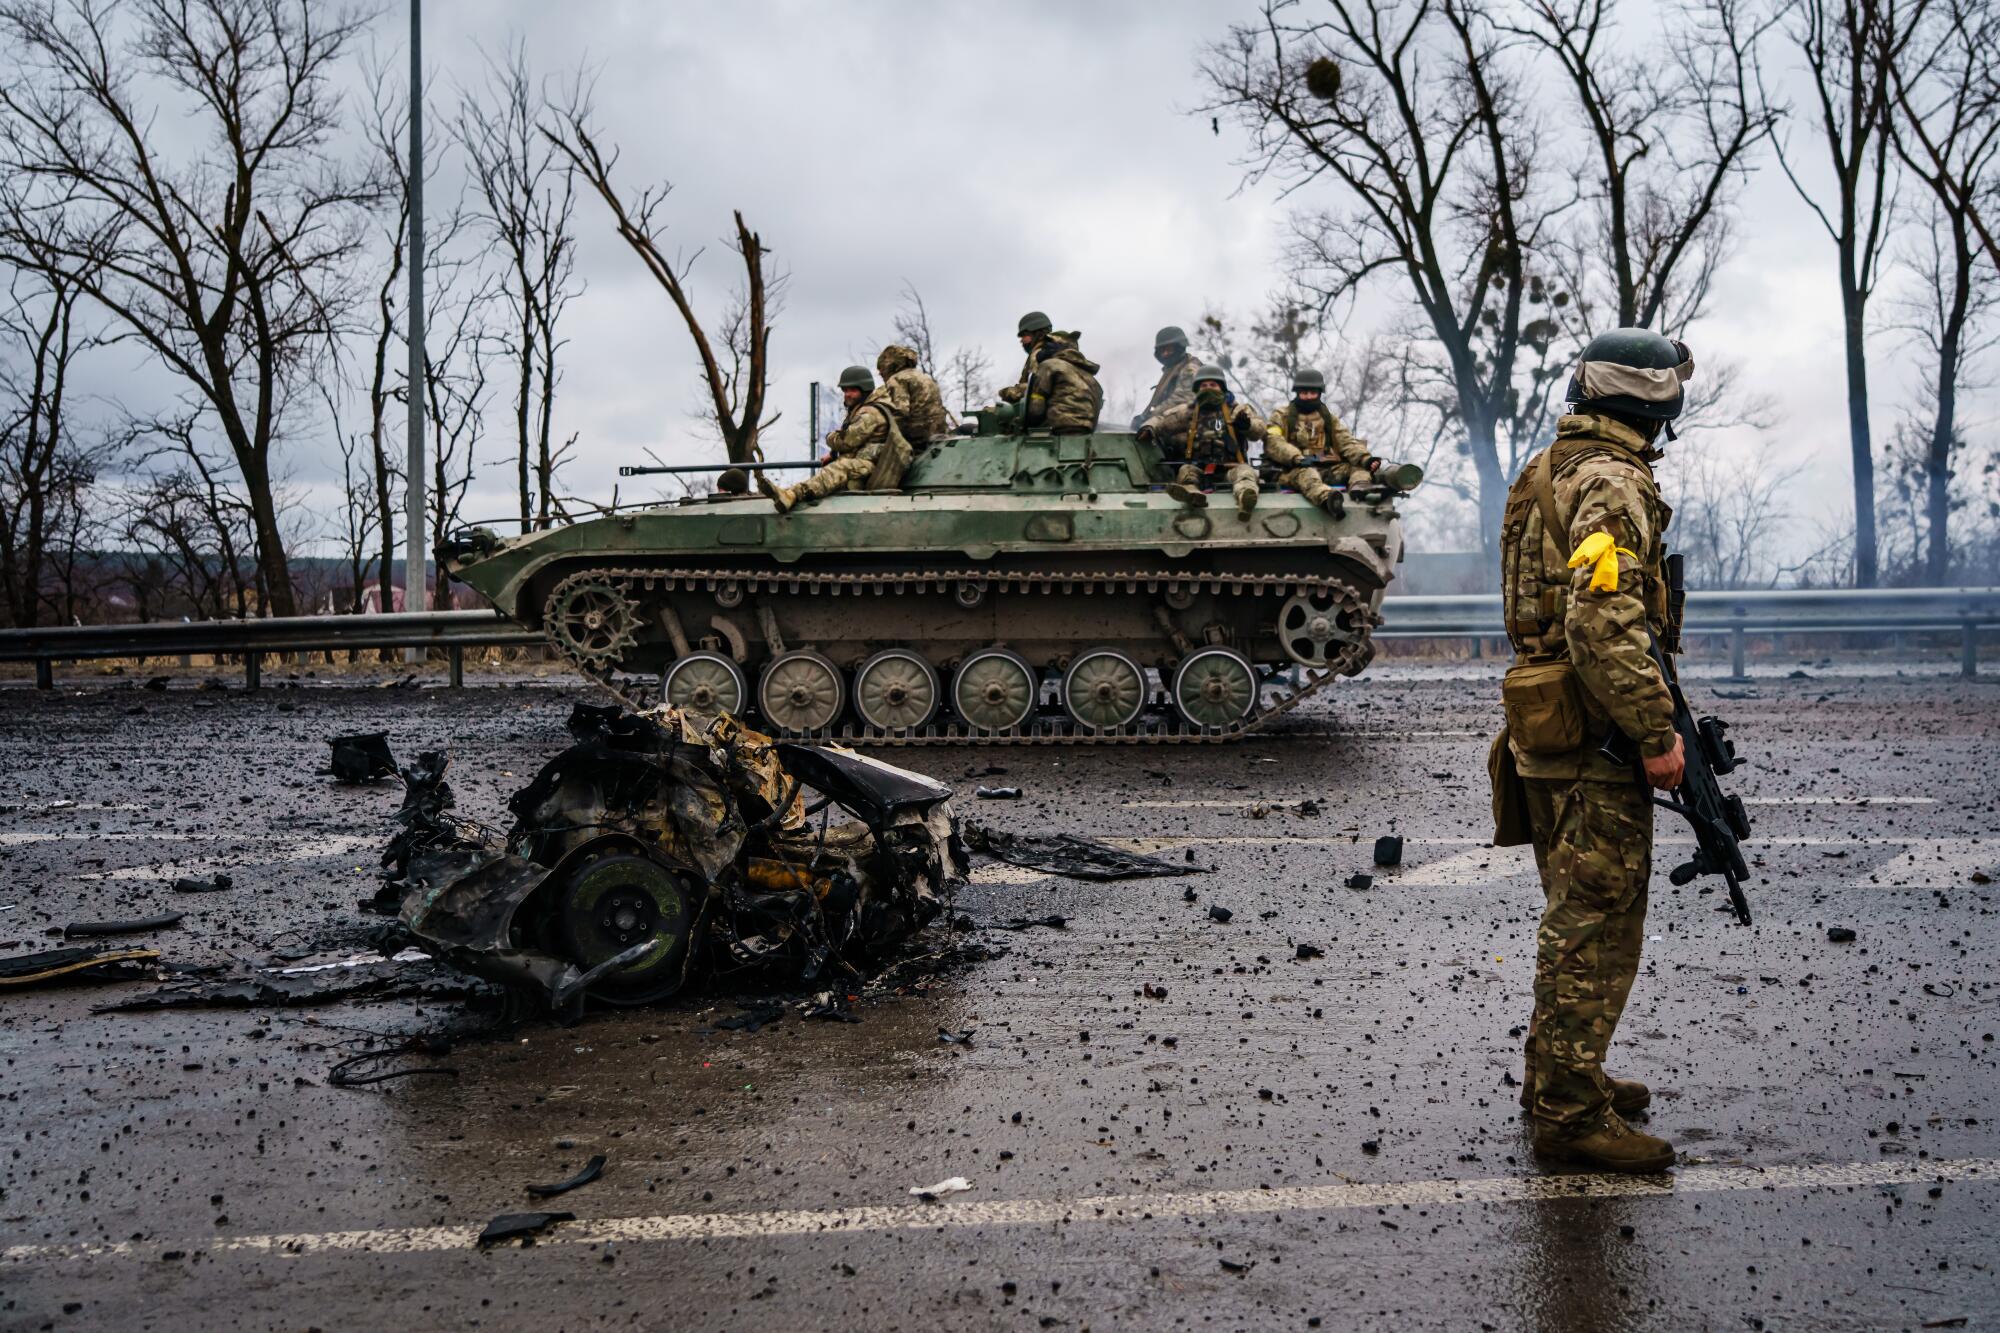 Uniformed troops ride a military vehicle on a debris-littered road